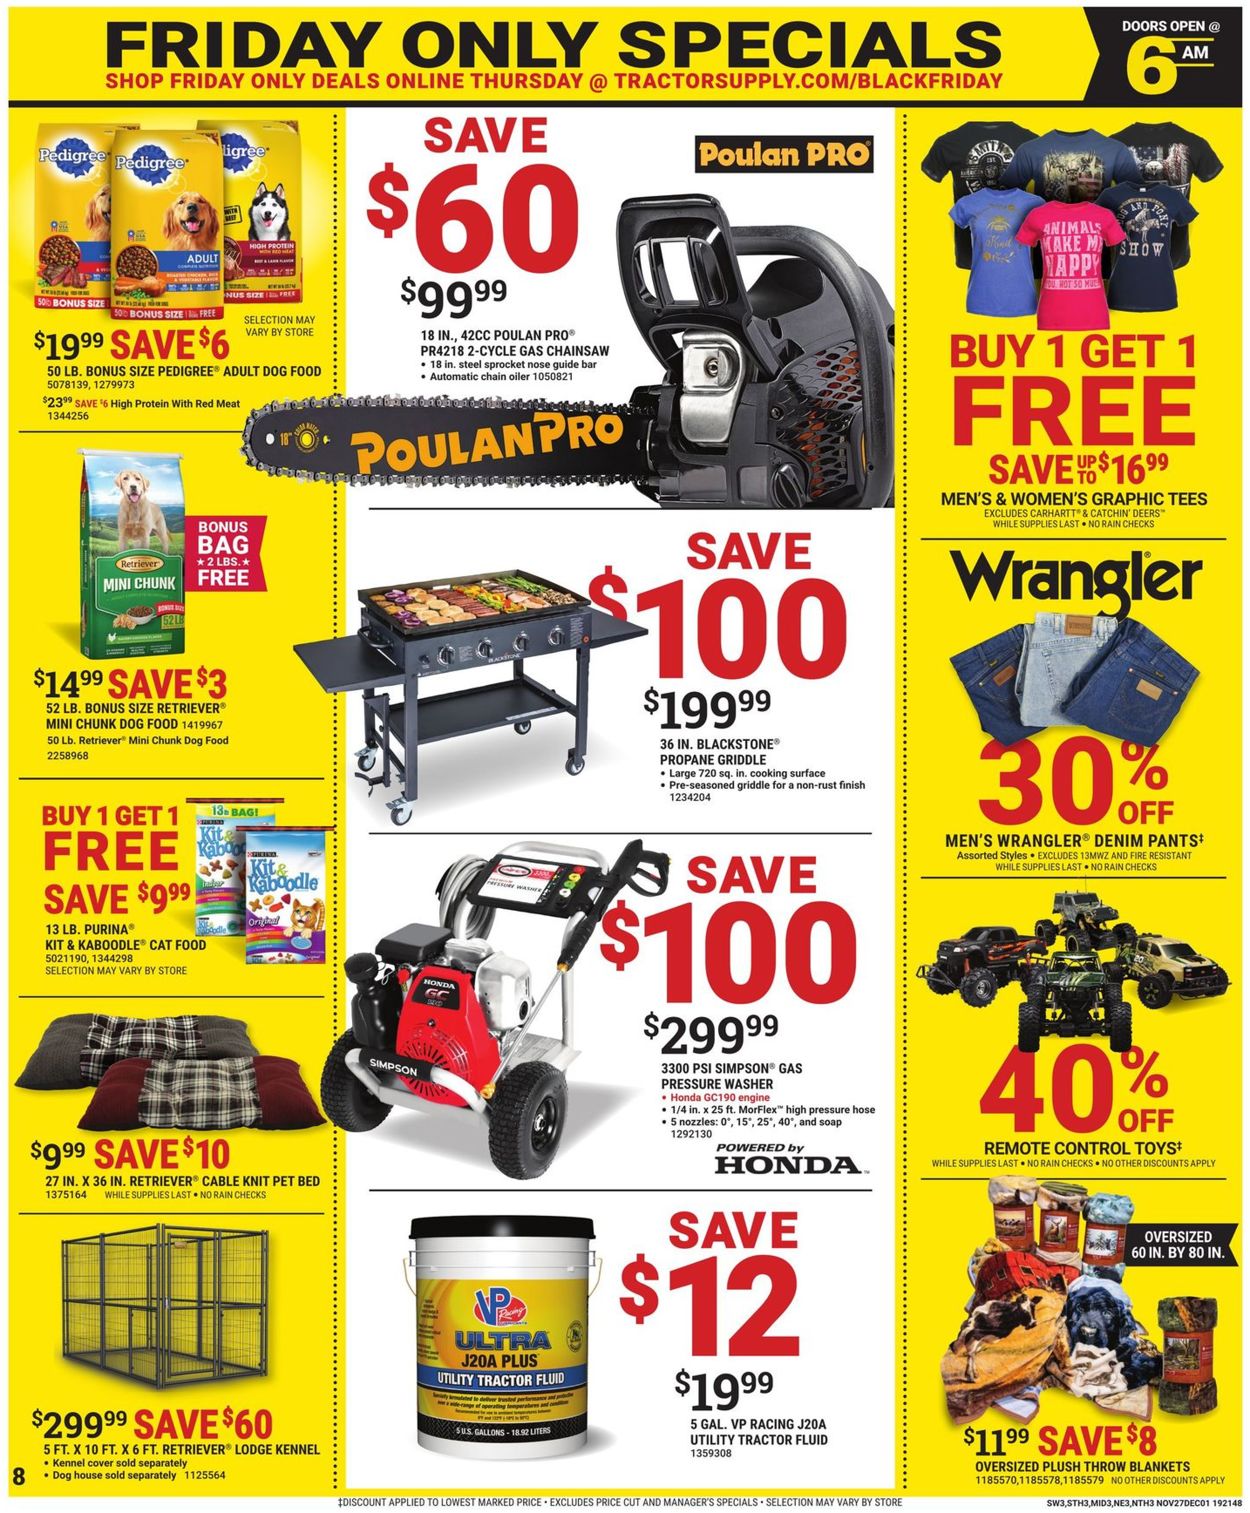 Tractor Supply - Black Friday Ad 2019 Current weekly ad 11/27 - 12/01/2019 [8] - 0